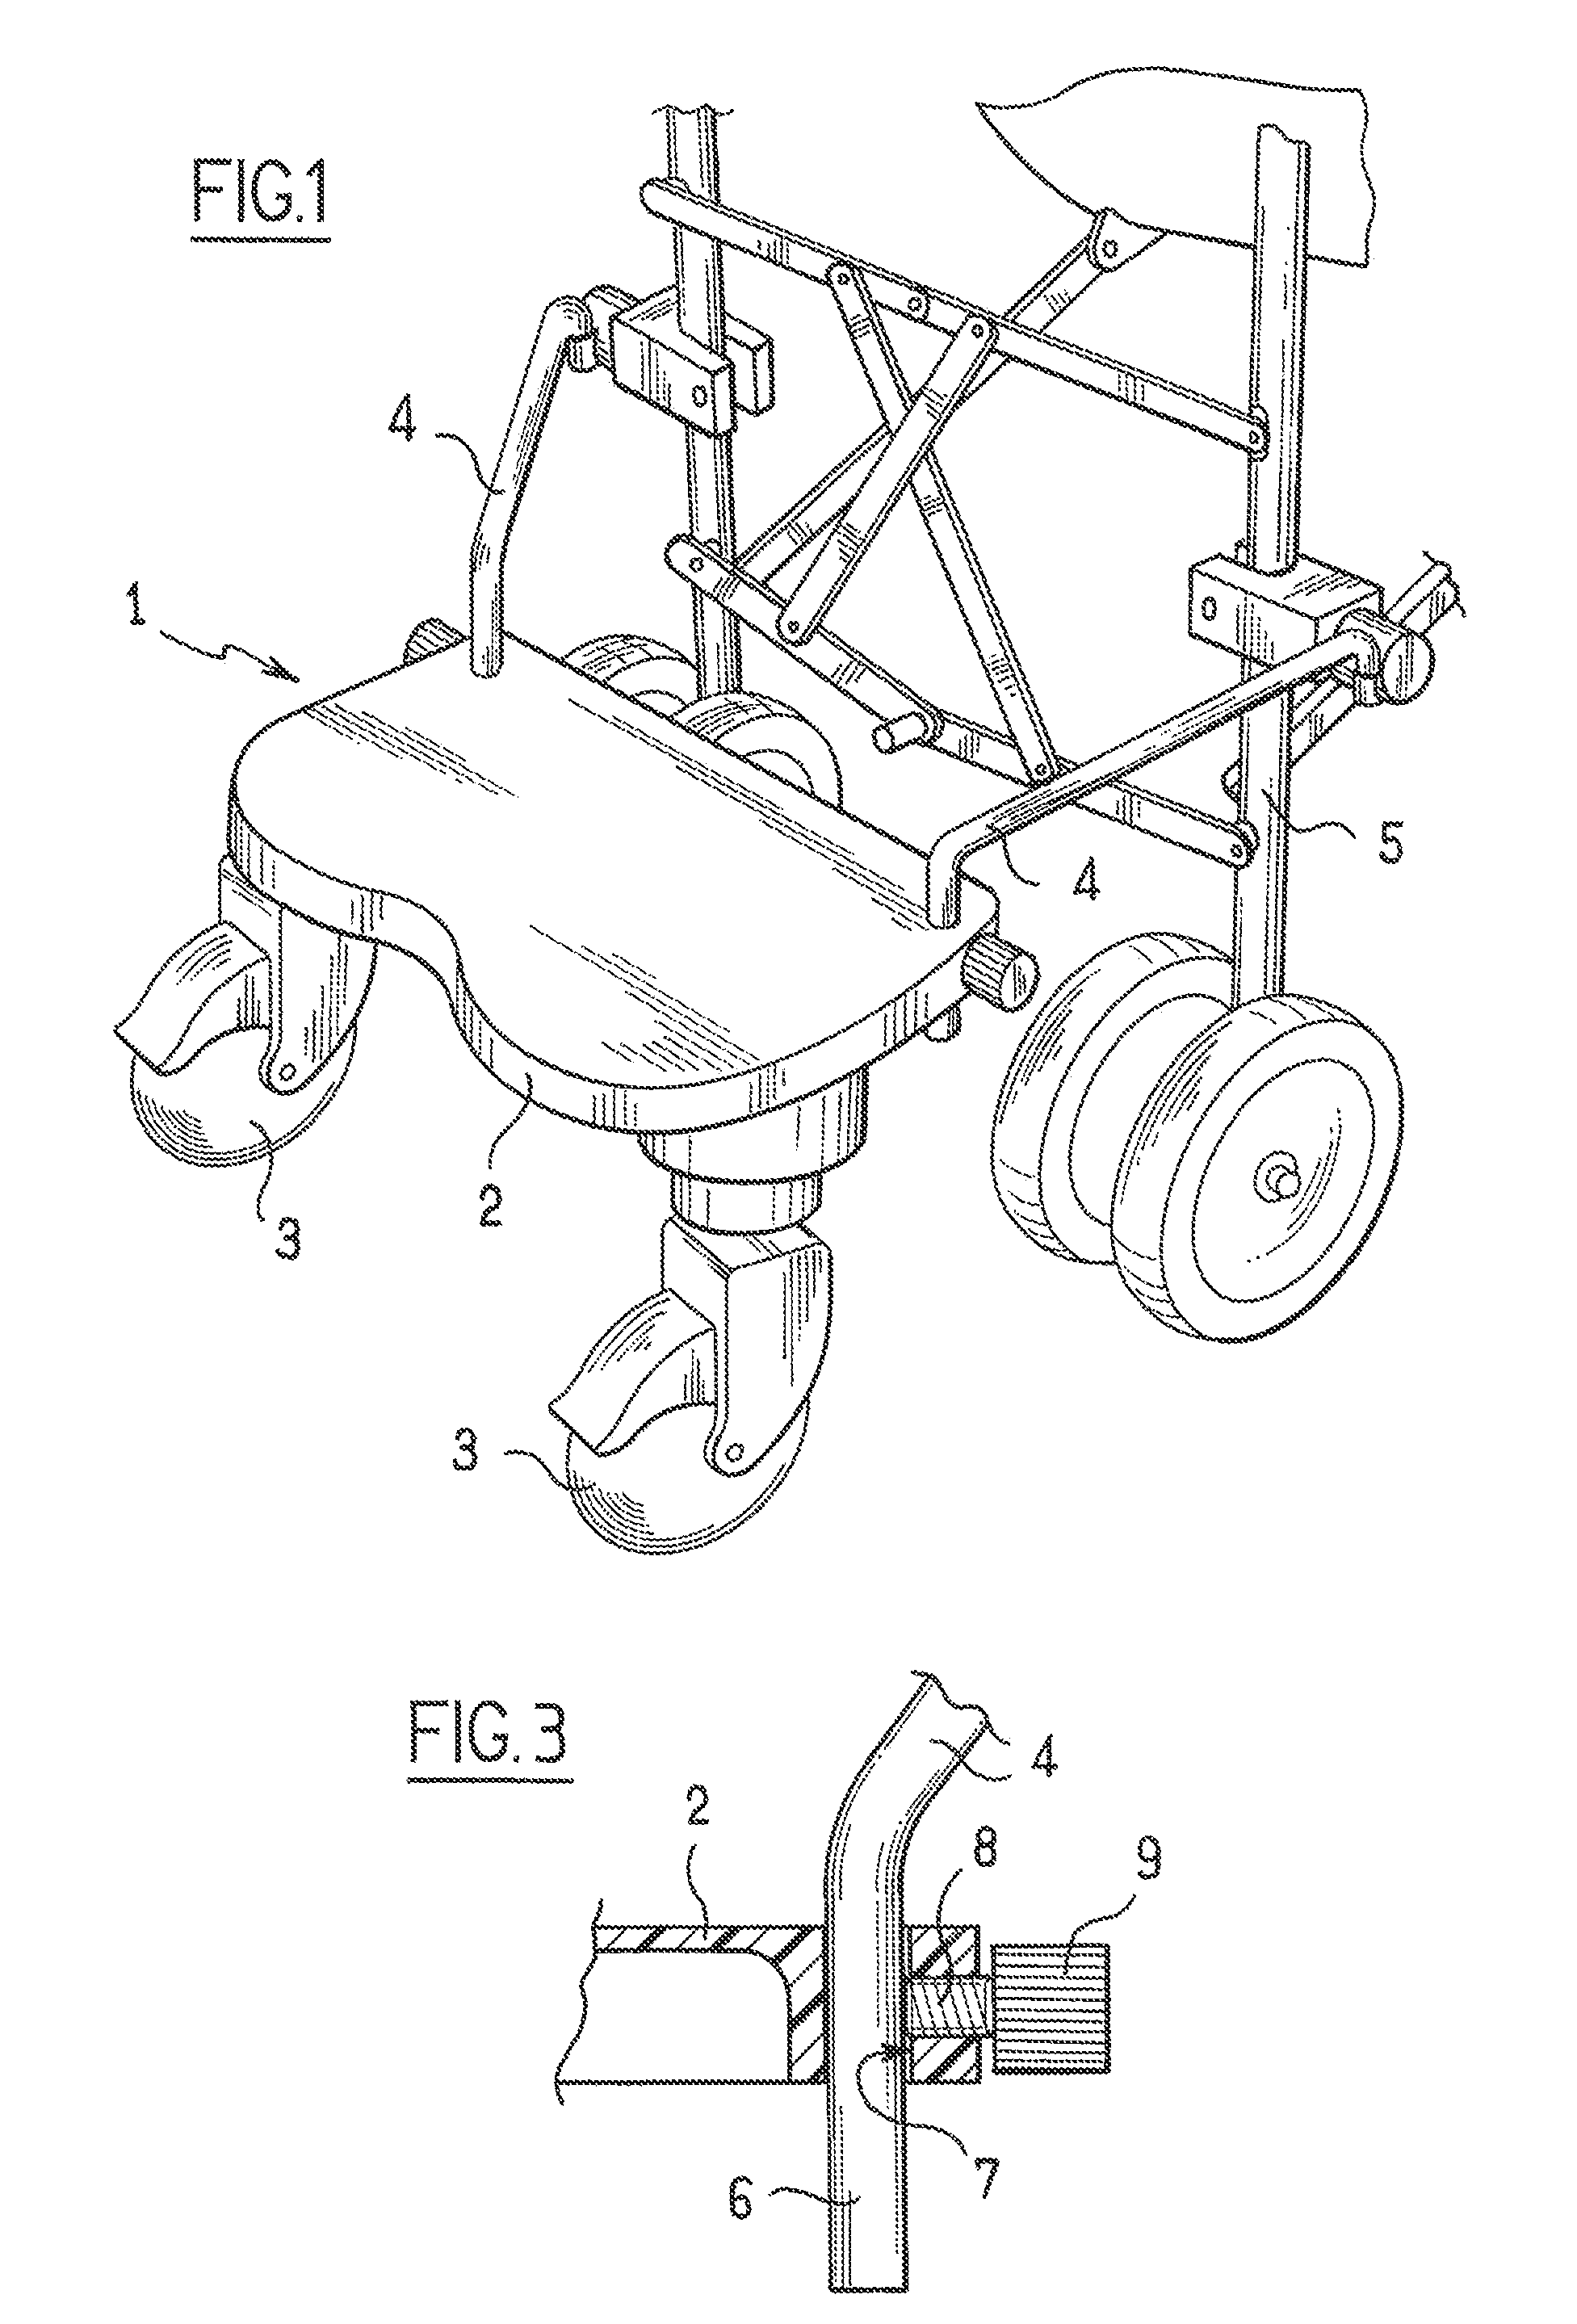 Methhod and Apparatus for Limiting the Vibration of Steel or Aluminum strips in a Blown-Gas or -Air Cooling Zones